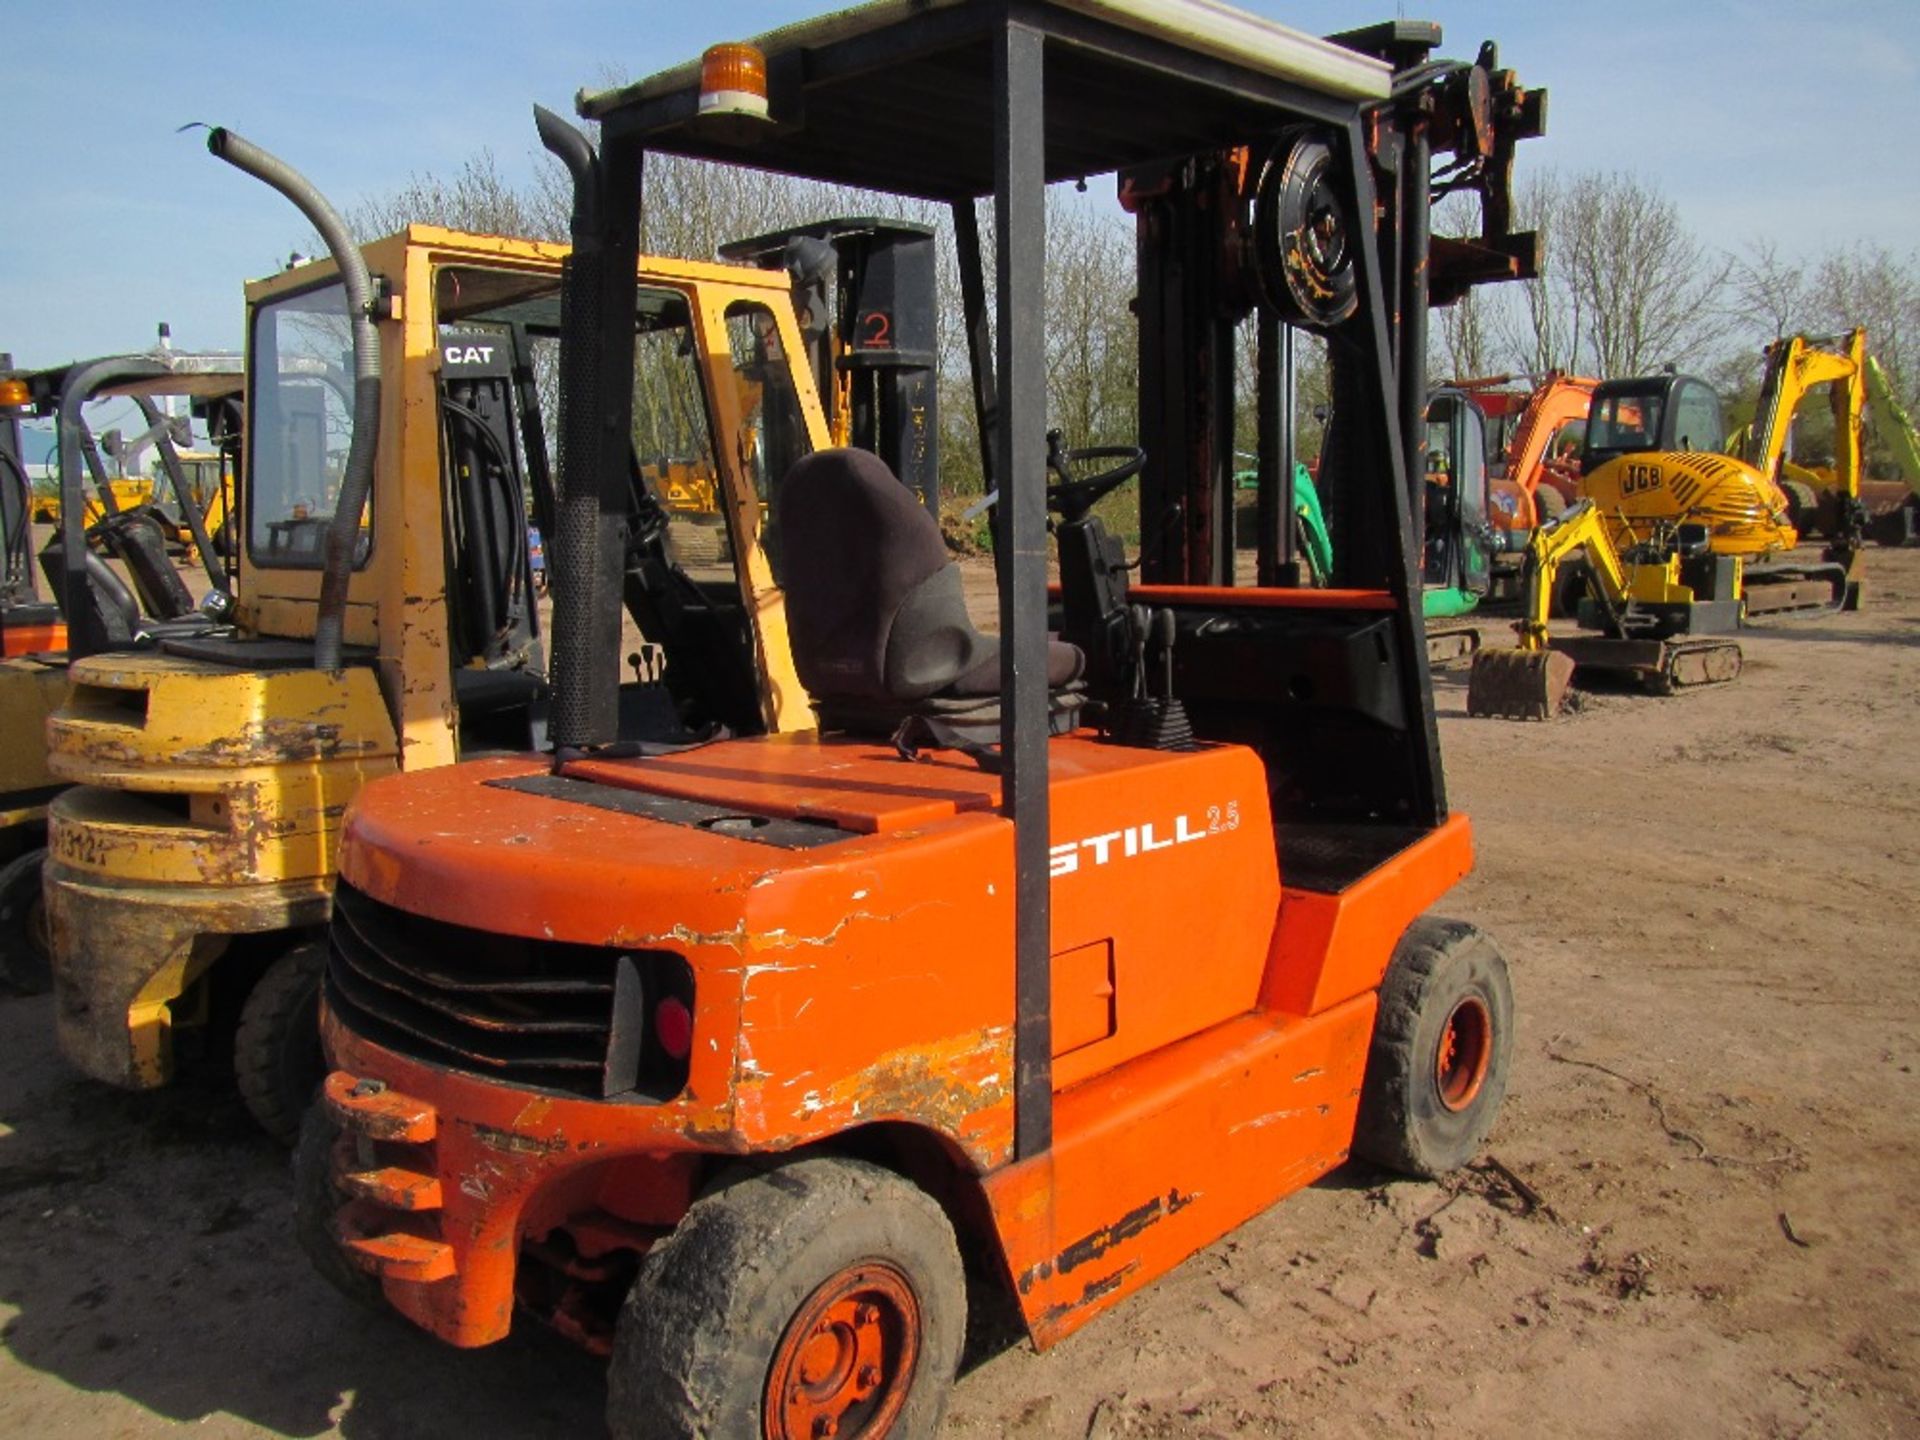 Stihl 2.5 Ton Forklift UNRESERVED LOT - Image 3 of 5